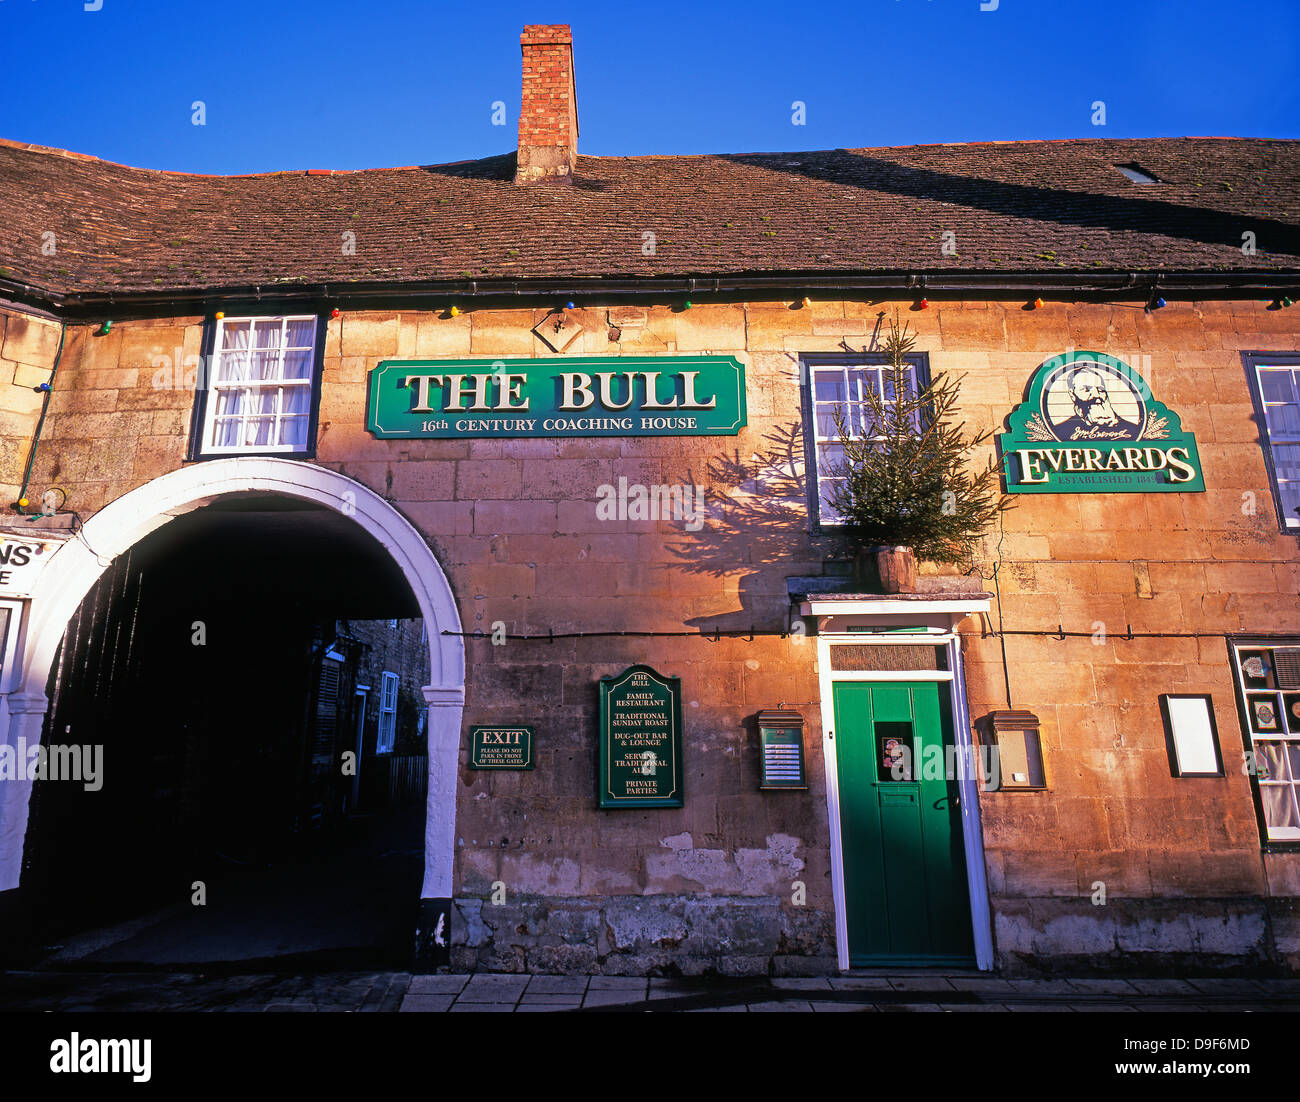 The Bull - warm morning light on a 16th century stone built pub / restaurant in the market town of Market Deeping, Lincolnshire, England, UK. Stock Photo